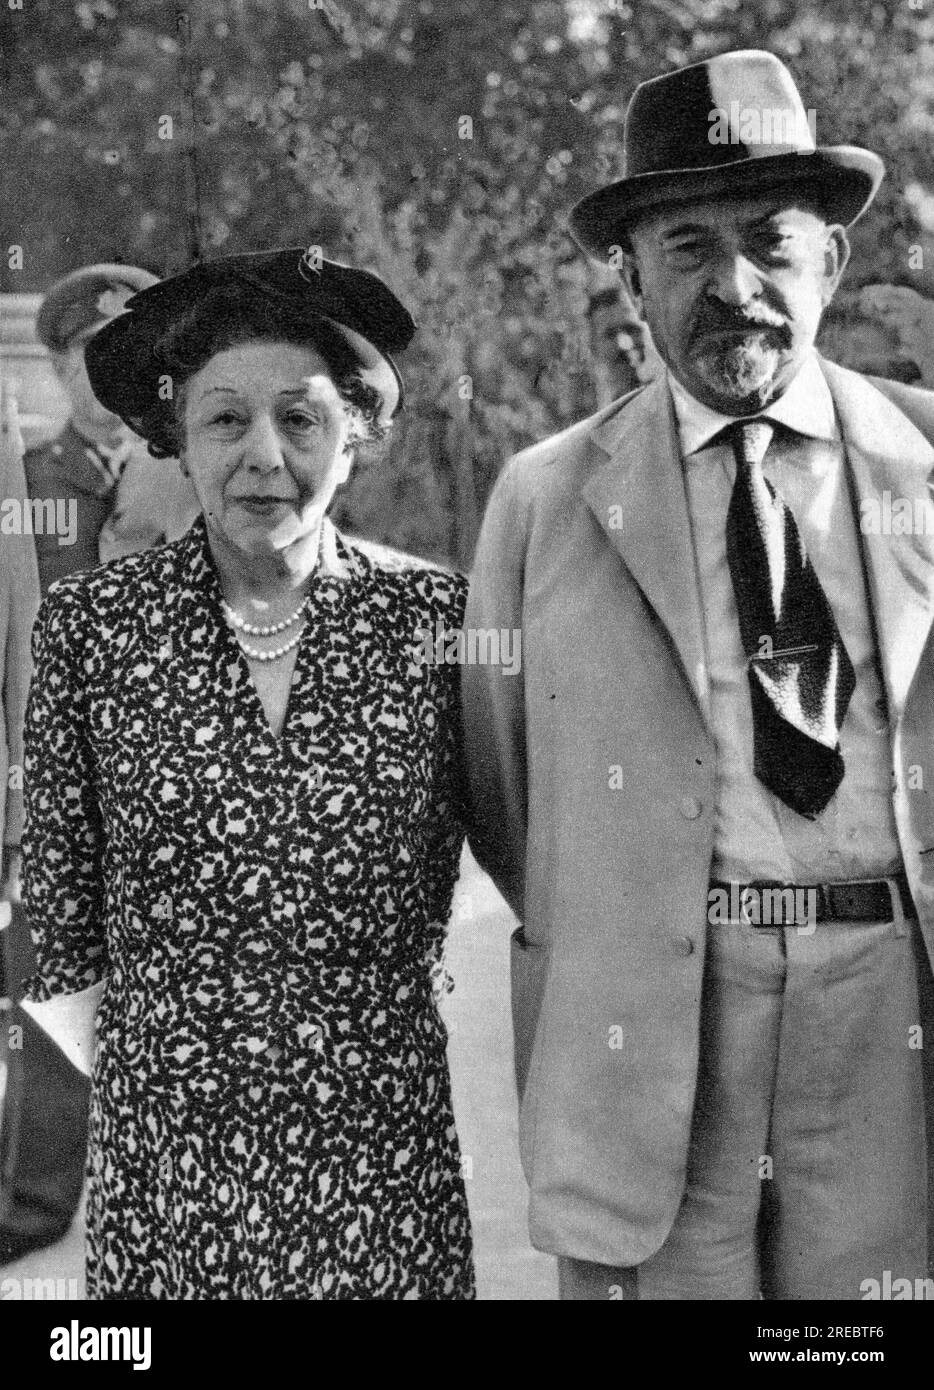 Weizmann, Chaim, 27.11.1874 - 9.11.1952, Israeli politician, with wife Vera, as president of Israel, ADDITIONAL-RIGHTS-CLEARANCE-INFO-NOT-AVAILABLE Stock Photo